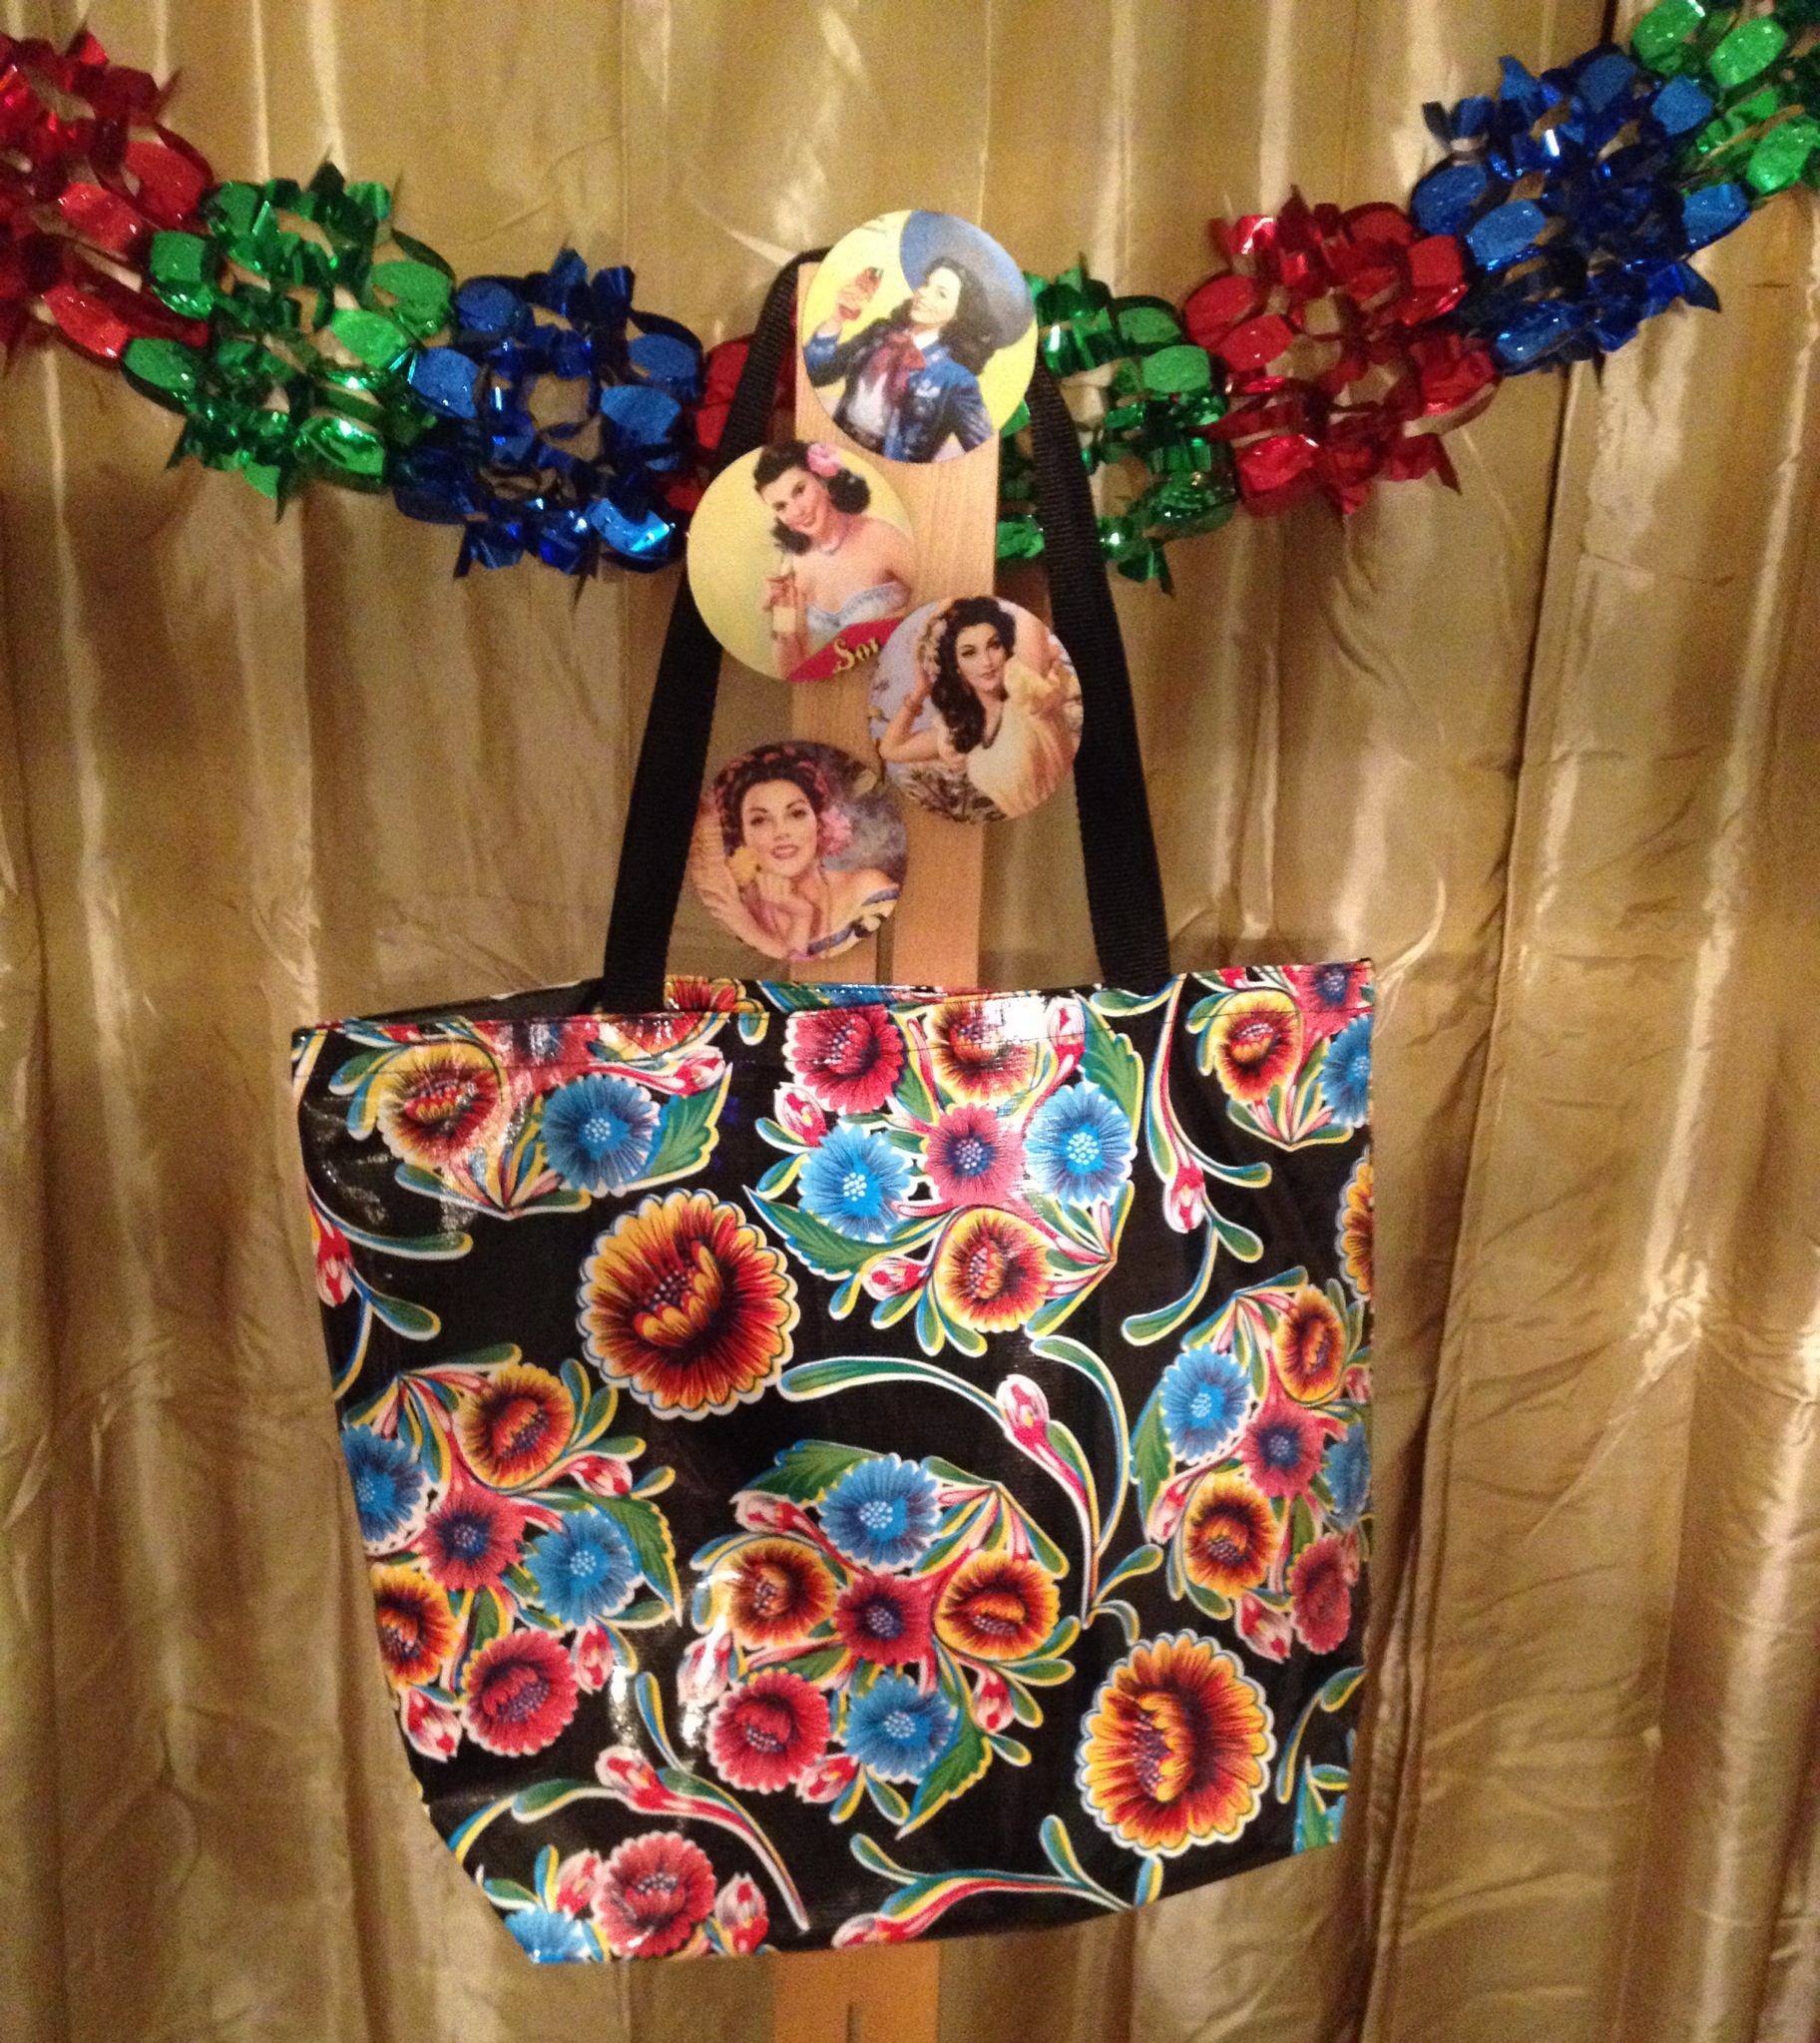 12 Days of Christmas: Day Two - Mexican Oil Cloth Tote and Calendar Girl Coasters